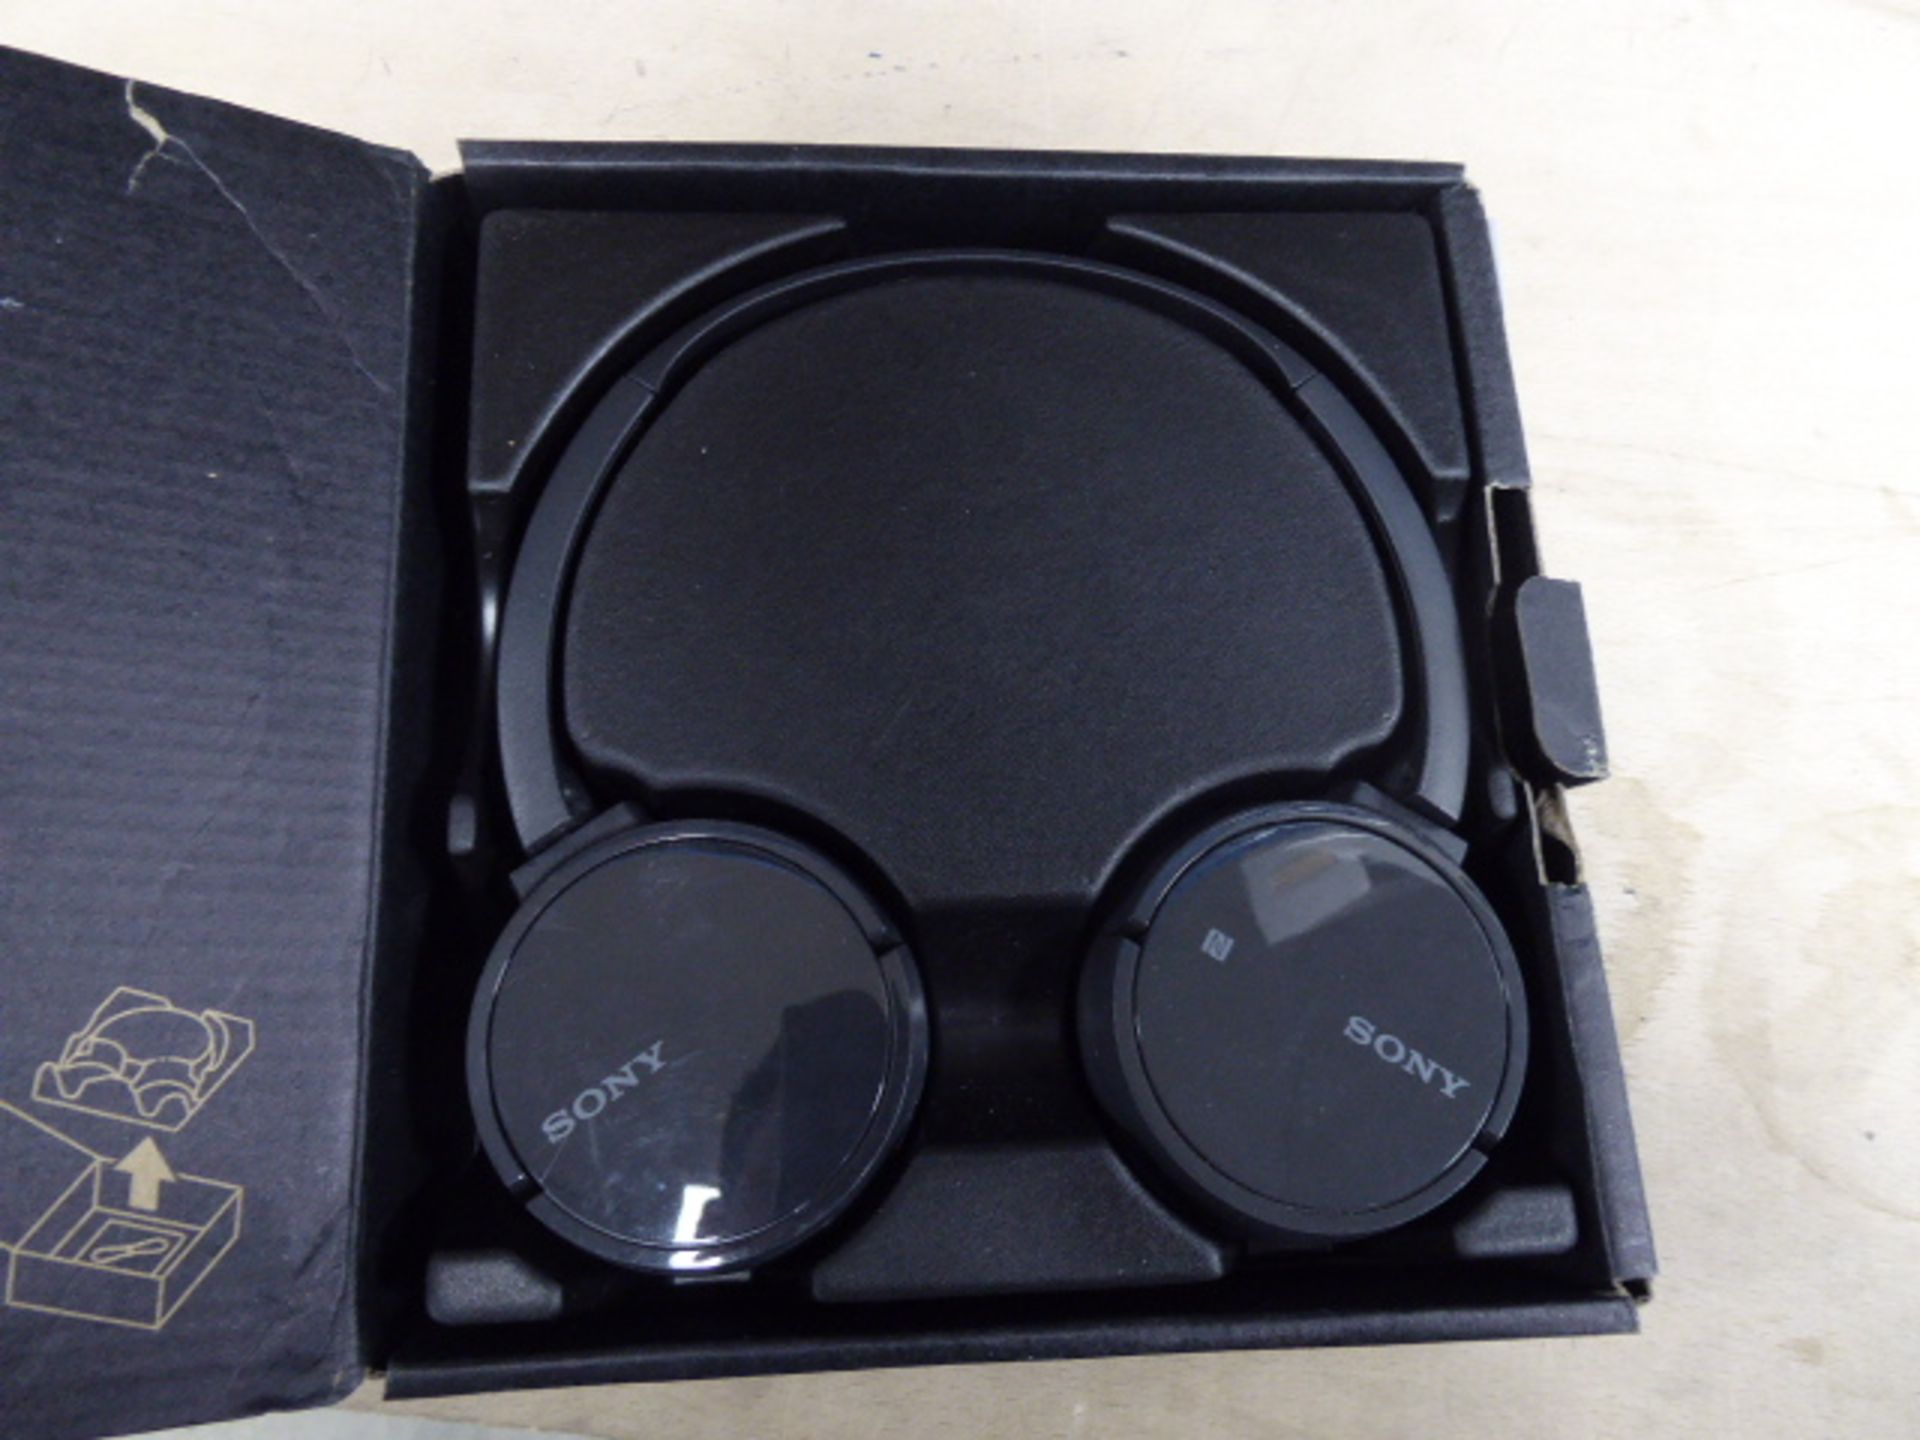 Boxed pair of Sony headphones (a/f)